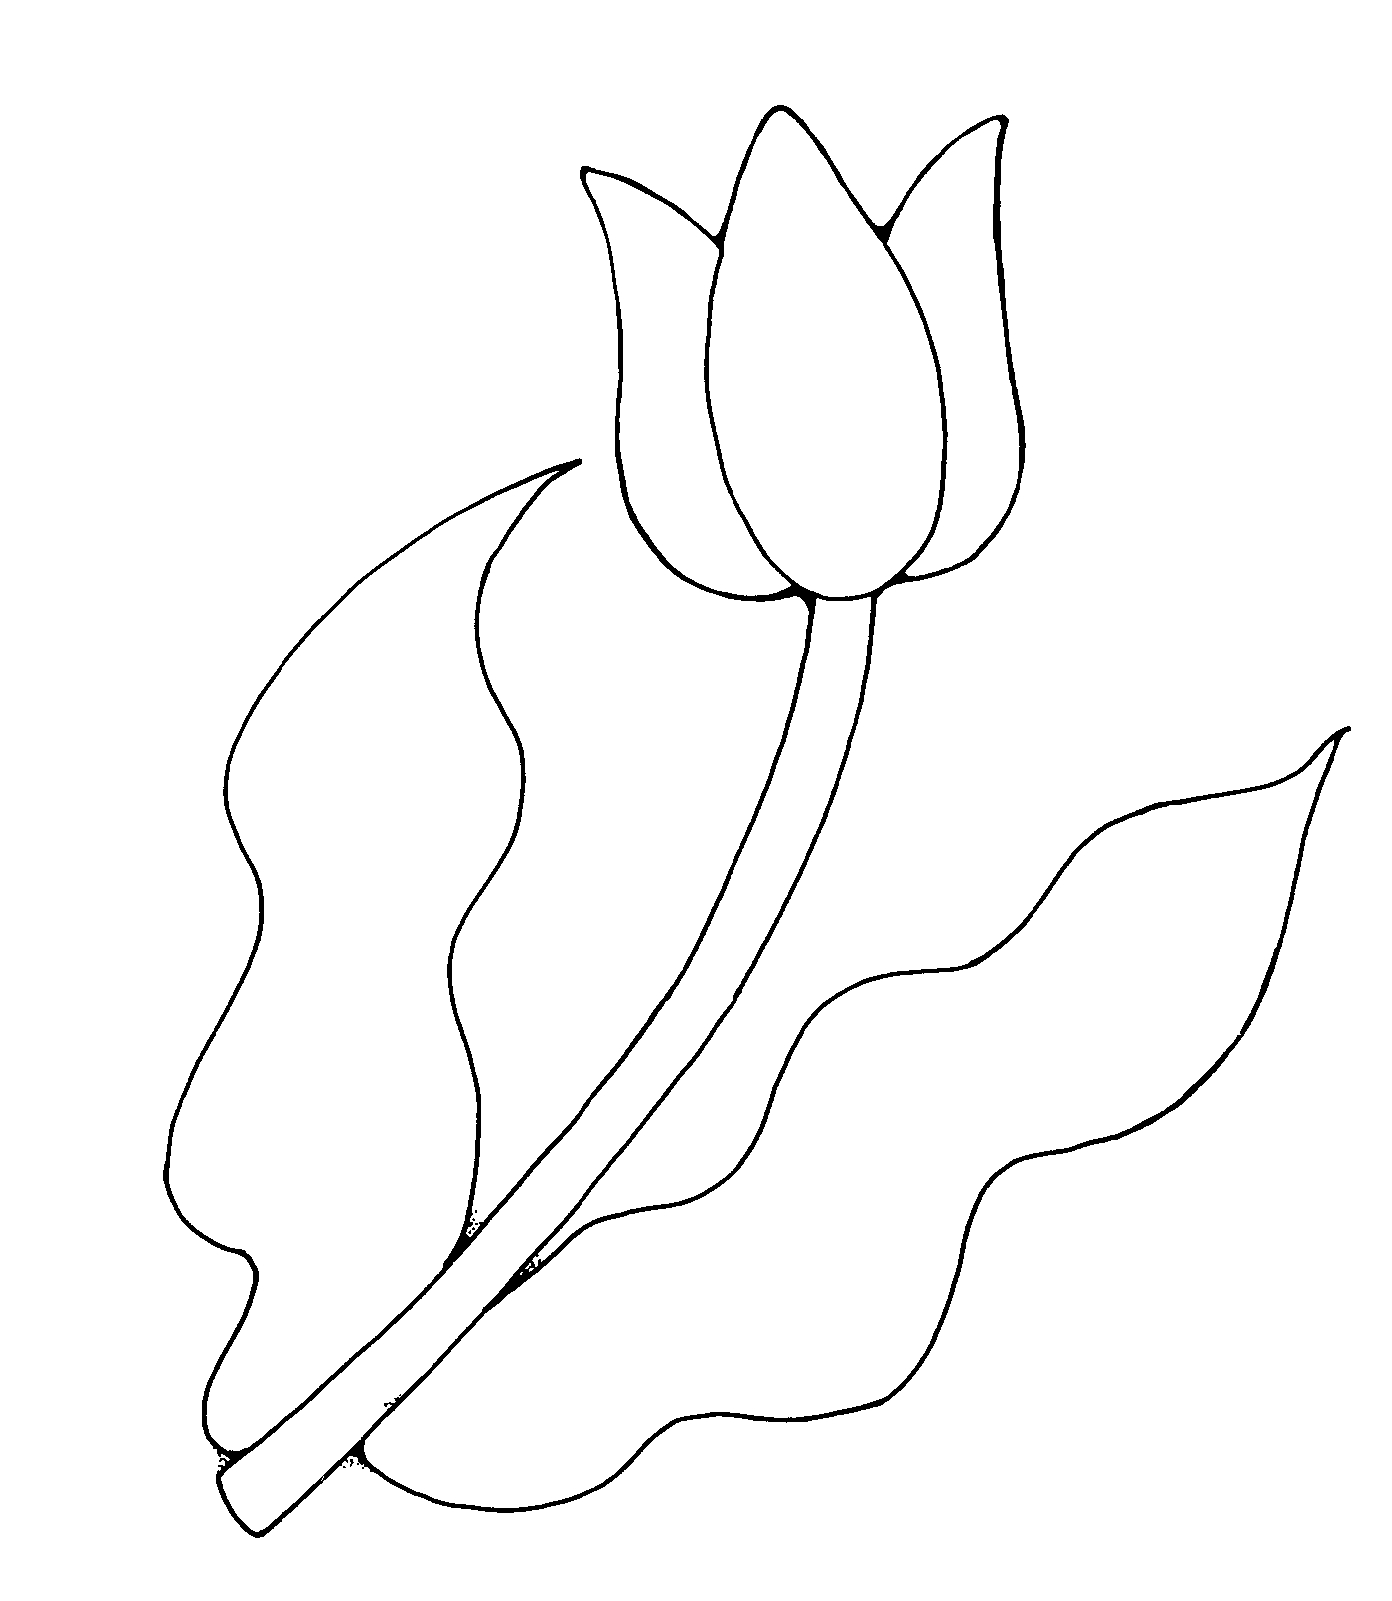 Free Tulips Clipart Black And White, Download Free Tulips Clipart Black